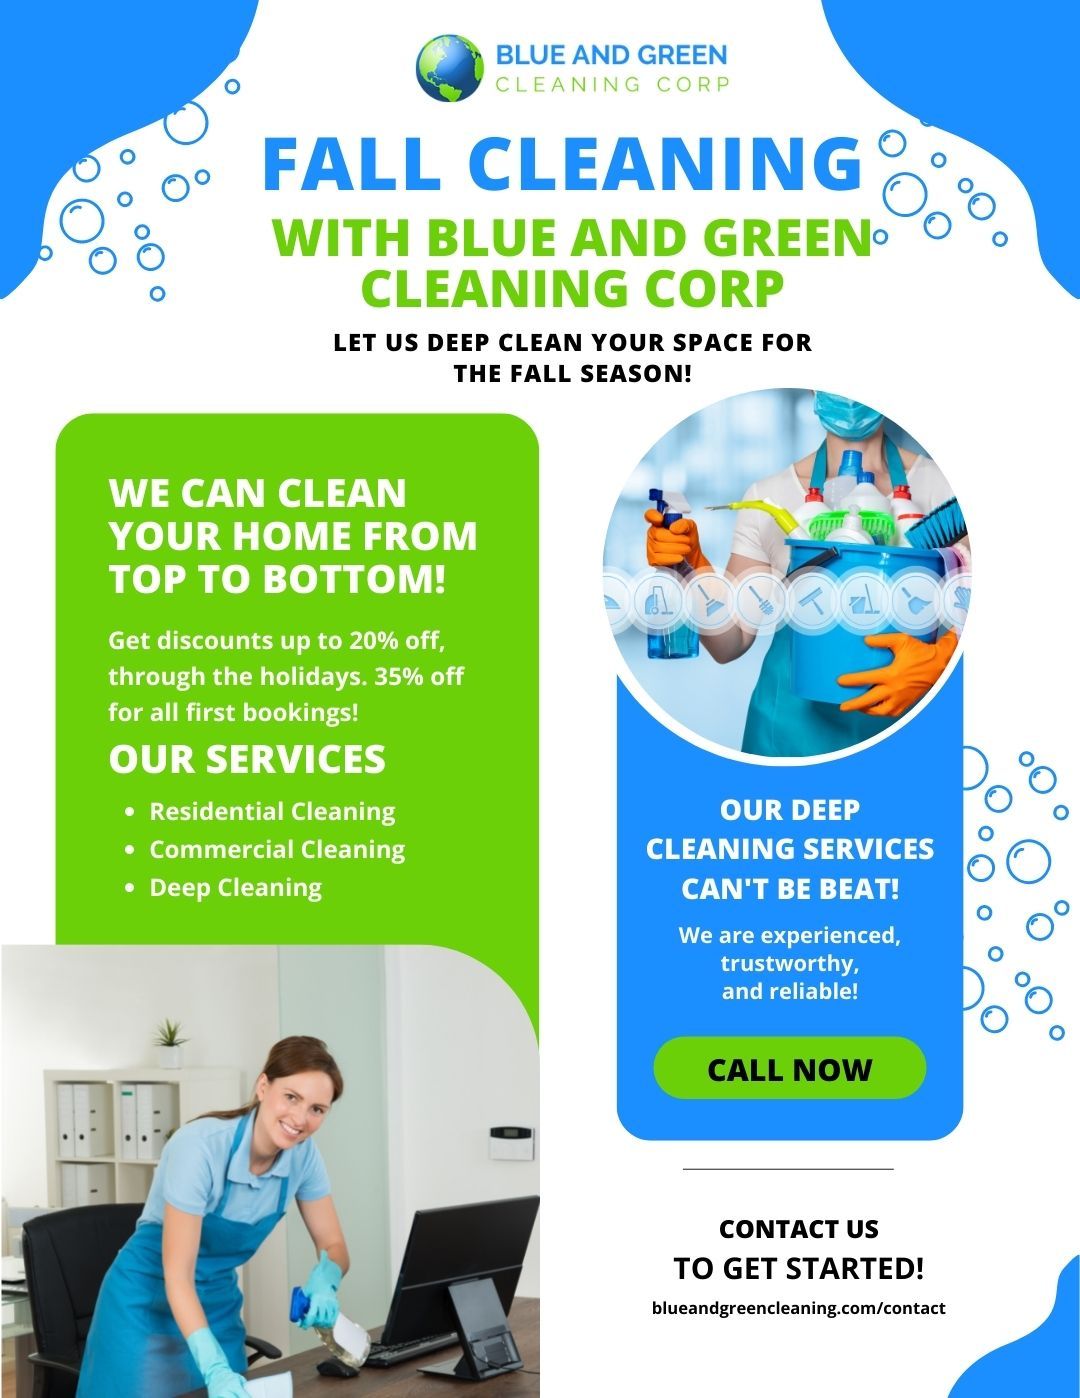 M26290 - Blue and Green Cleaning Corp_Fall Cleaning IG.jpg